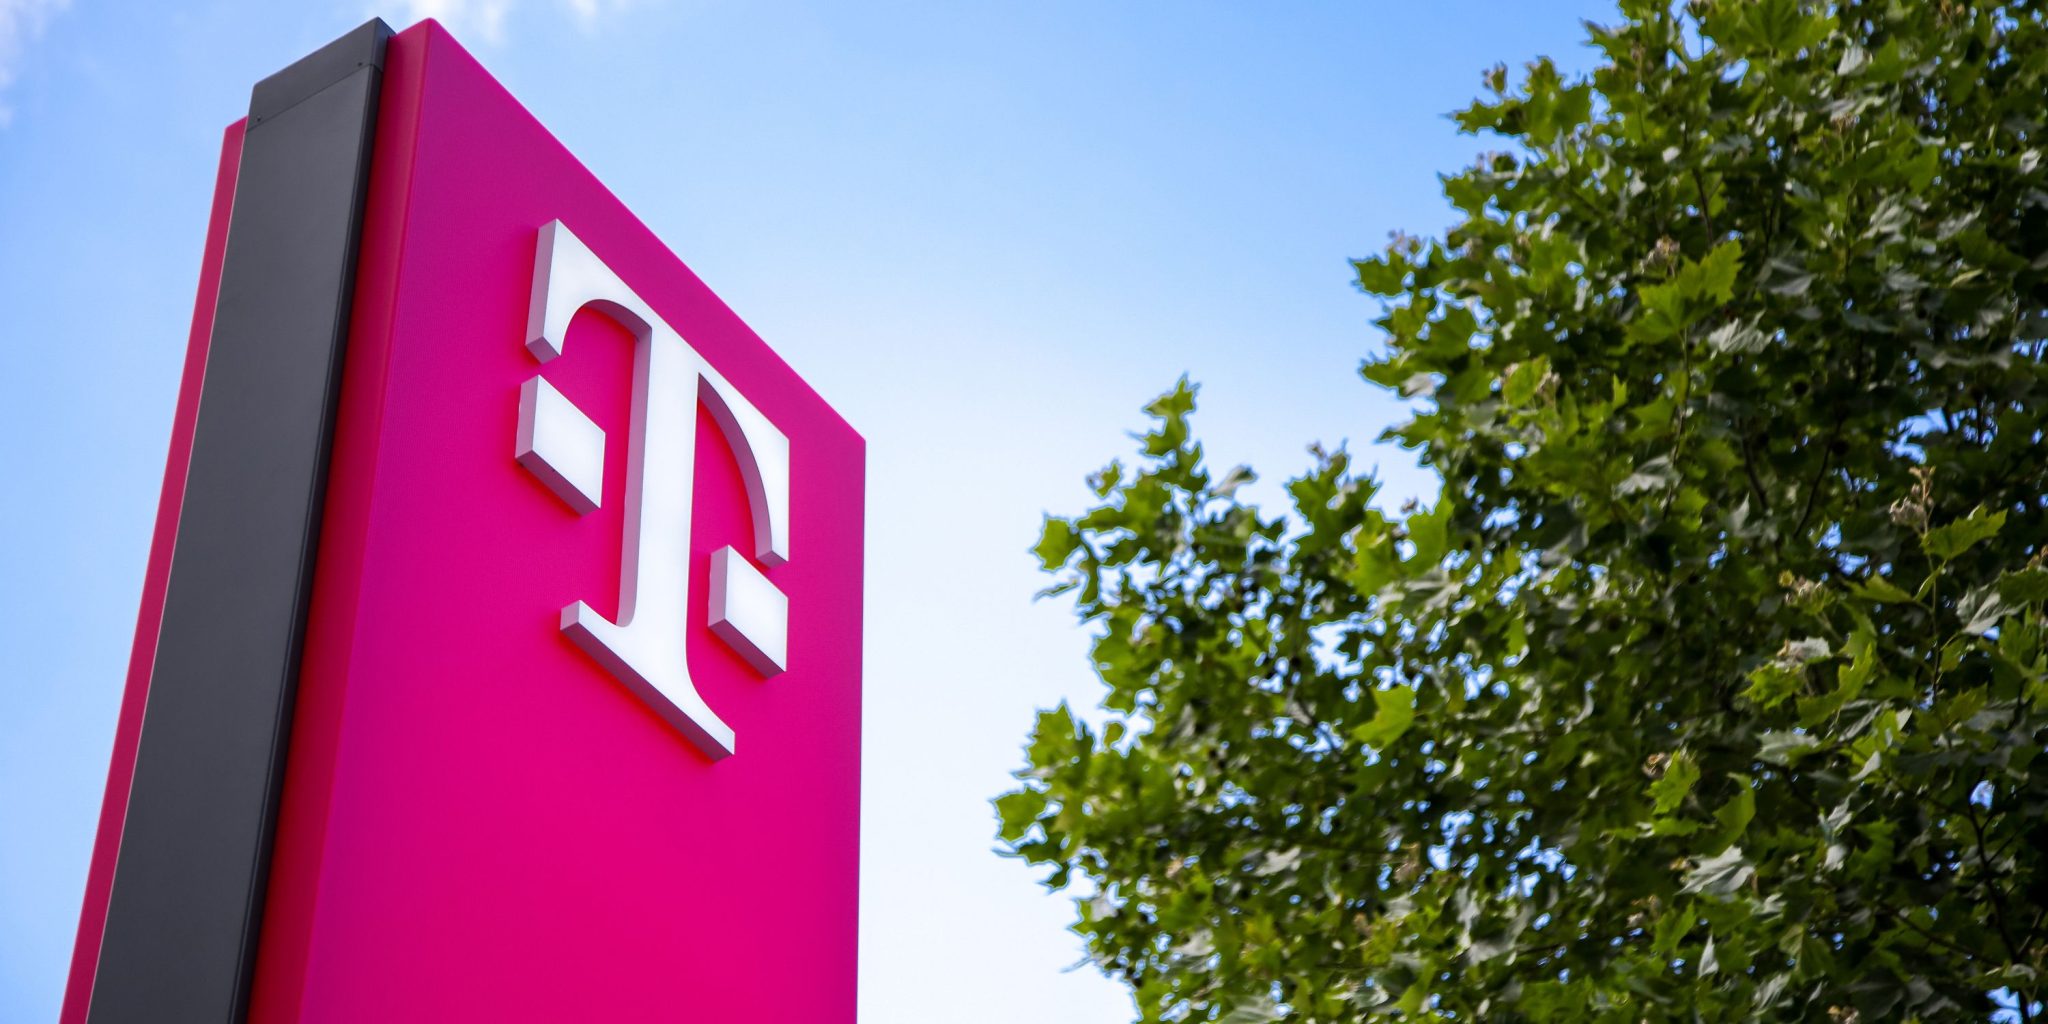 Europe’s Largest Telecommunications Company Deutsche Telekom Makes a Groundbreaking Bitcoin Move